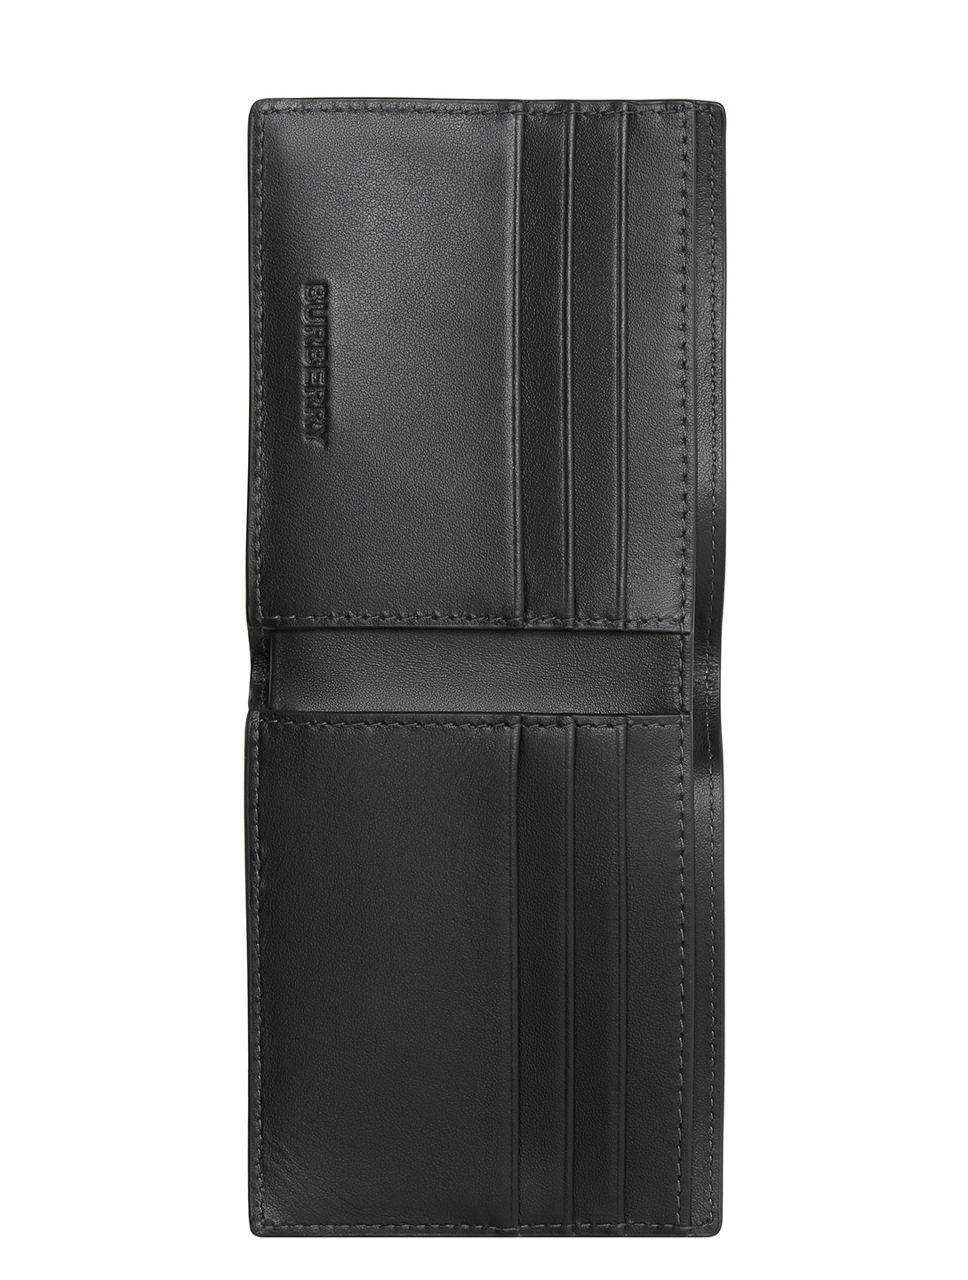 Check And Leather Slim Bifold Wallet